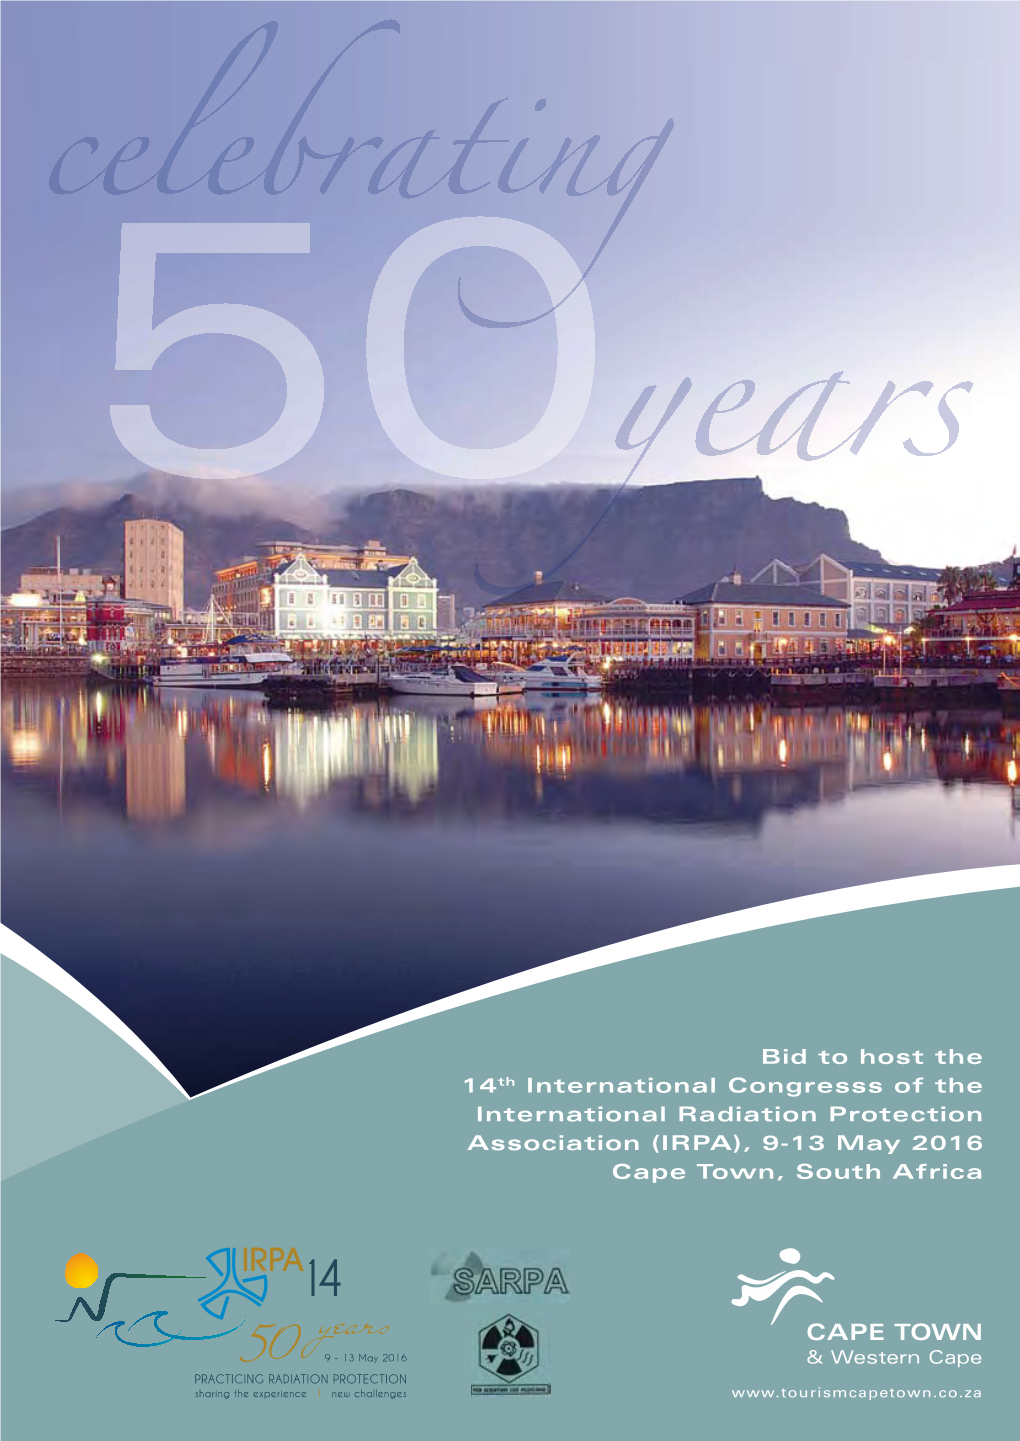 IRPA-14 (9-13 May 2016, Cape Town, South Africa